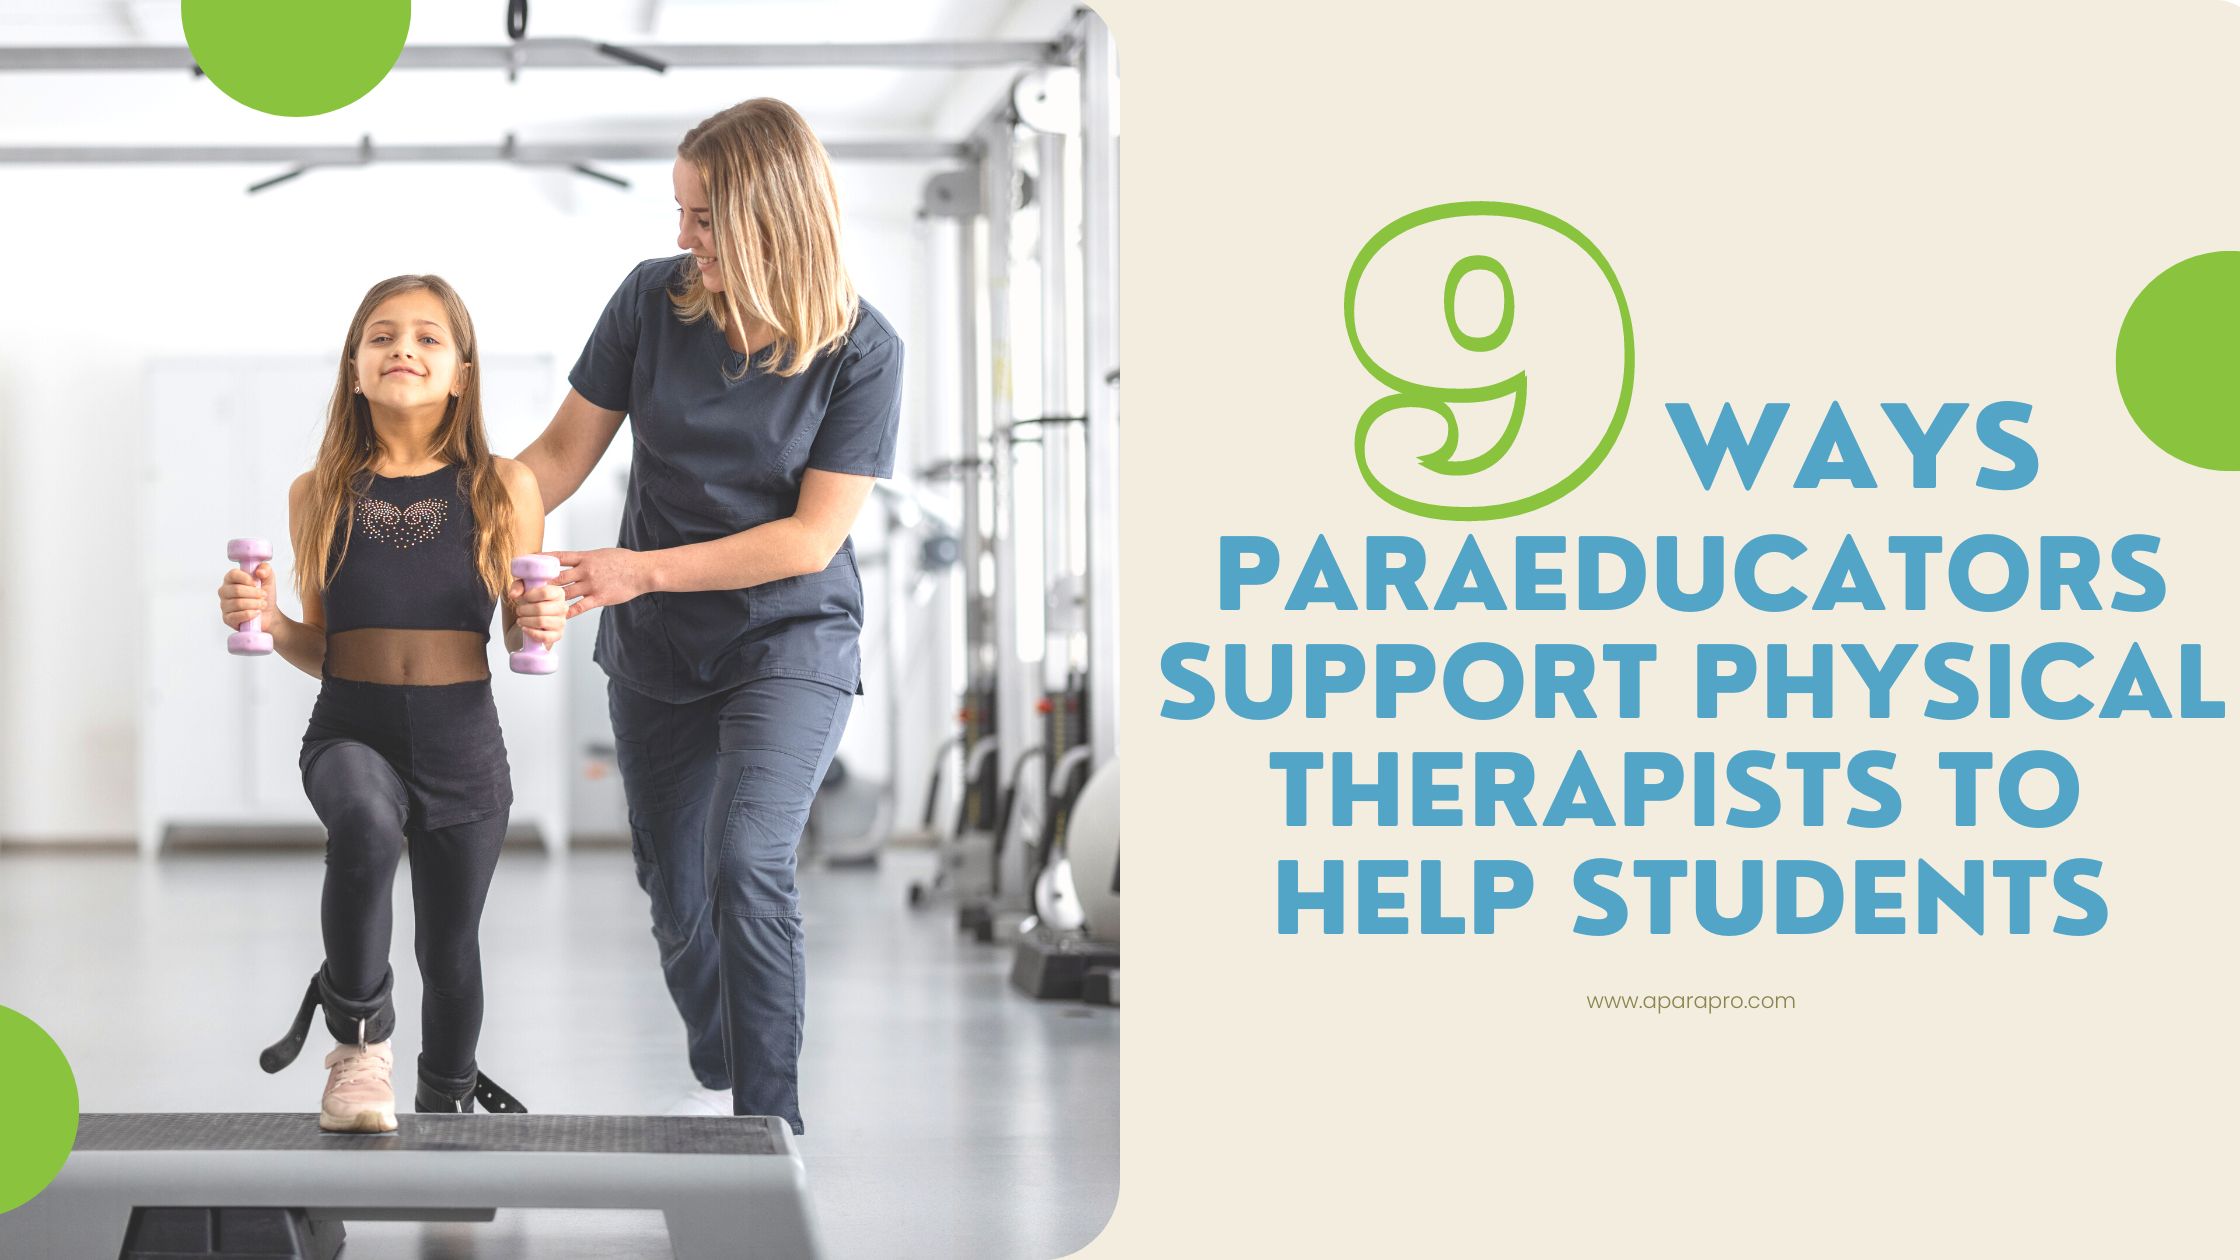 9 ways paraeducators support physical therapists to help students